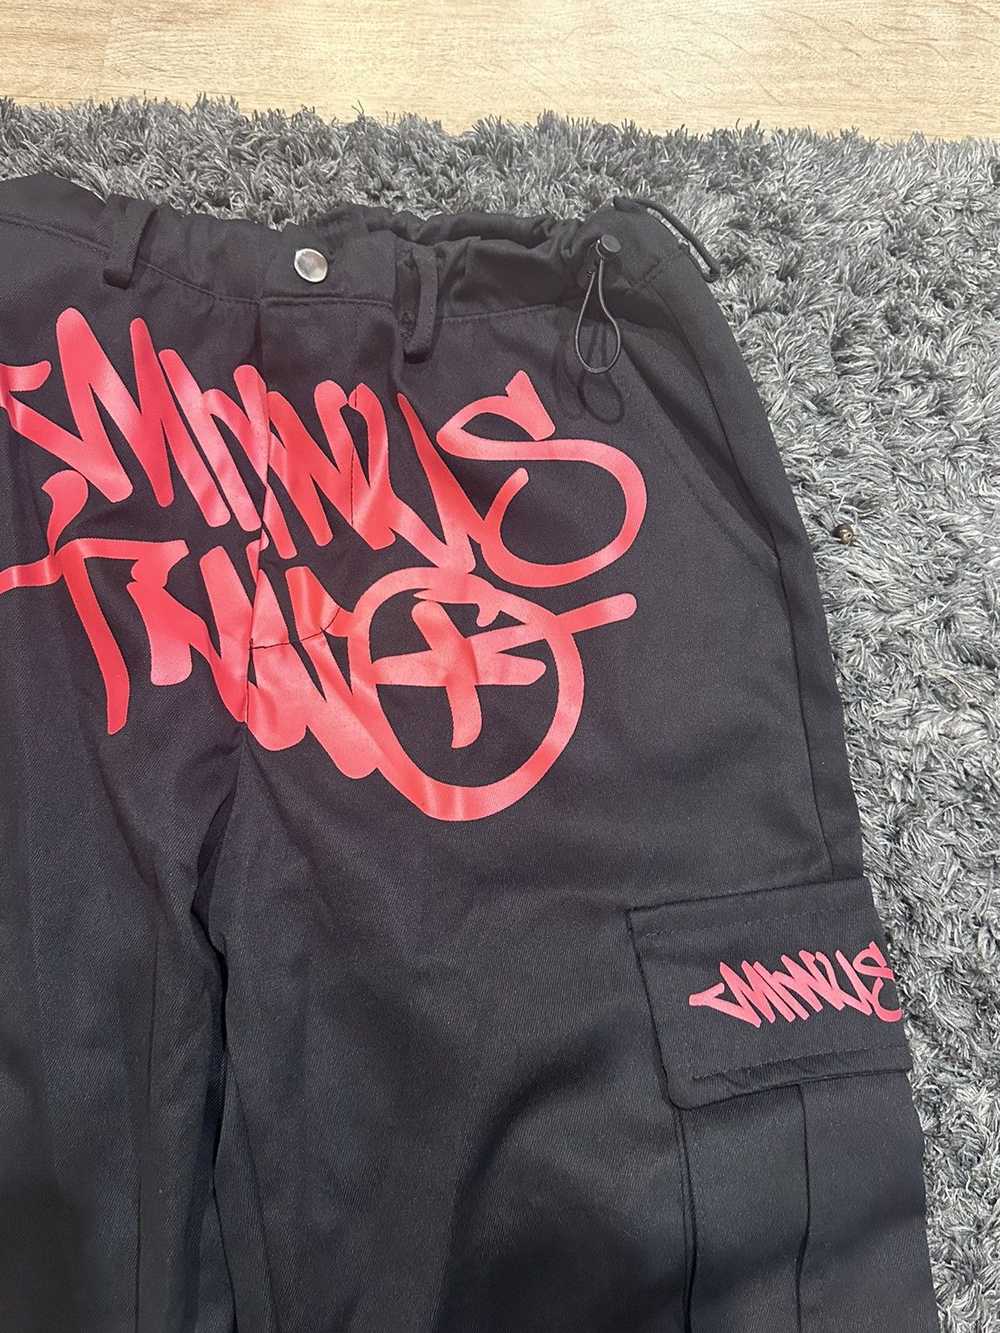 Japanese Brand Minus Two cargos, black and red - image 3